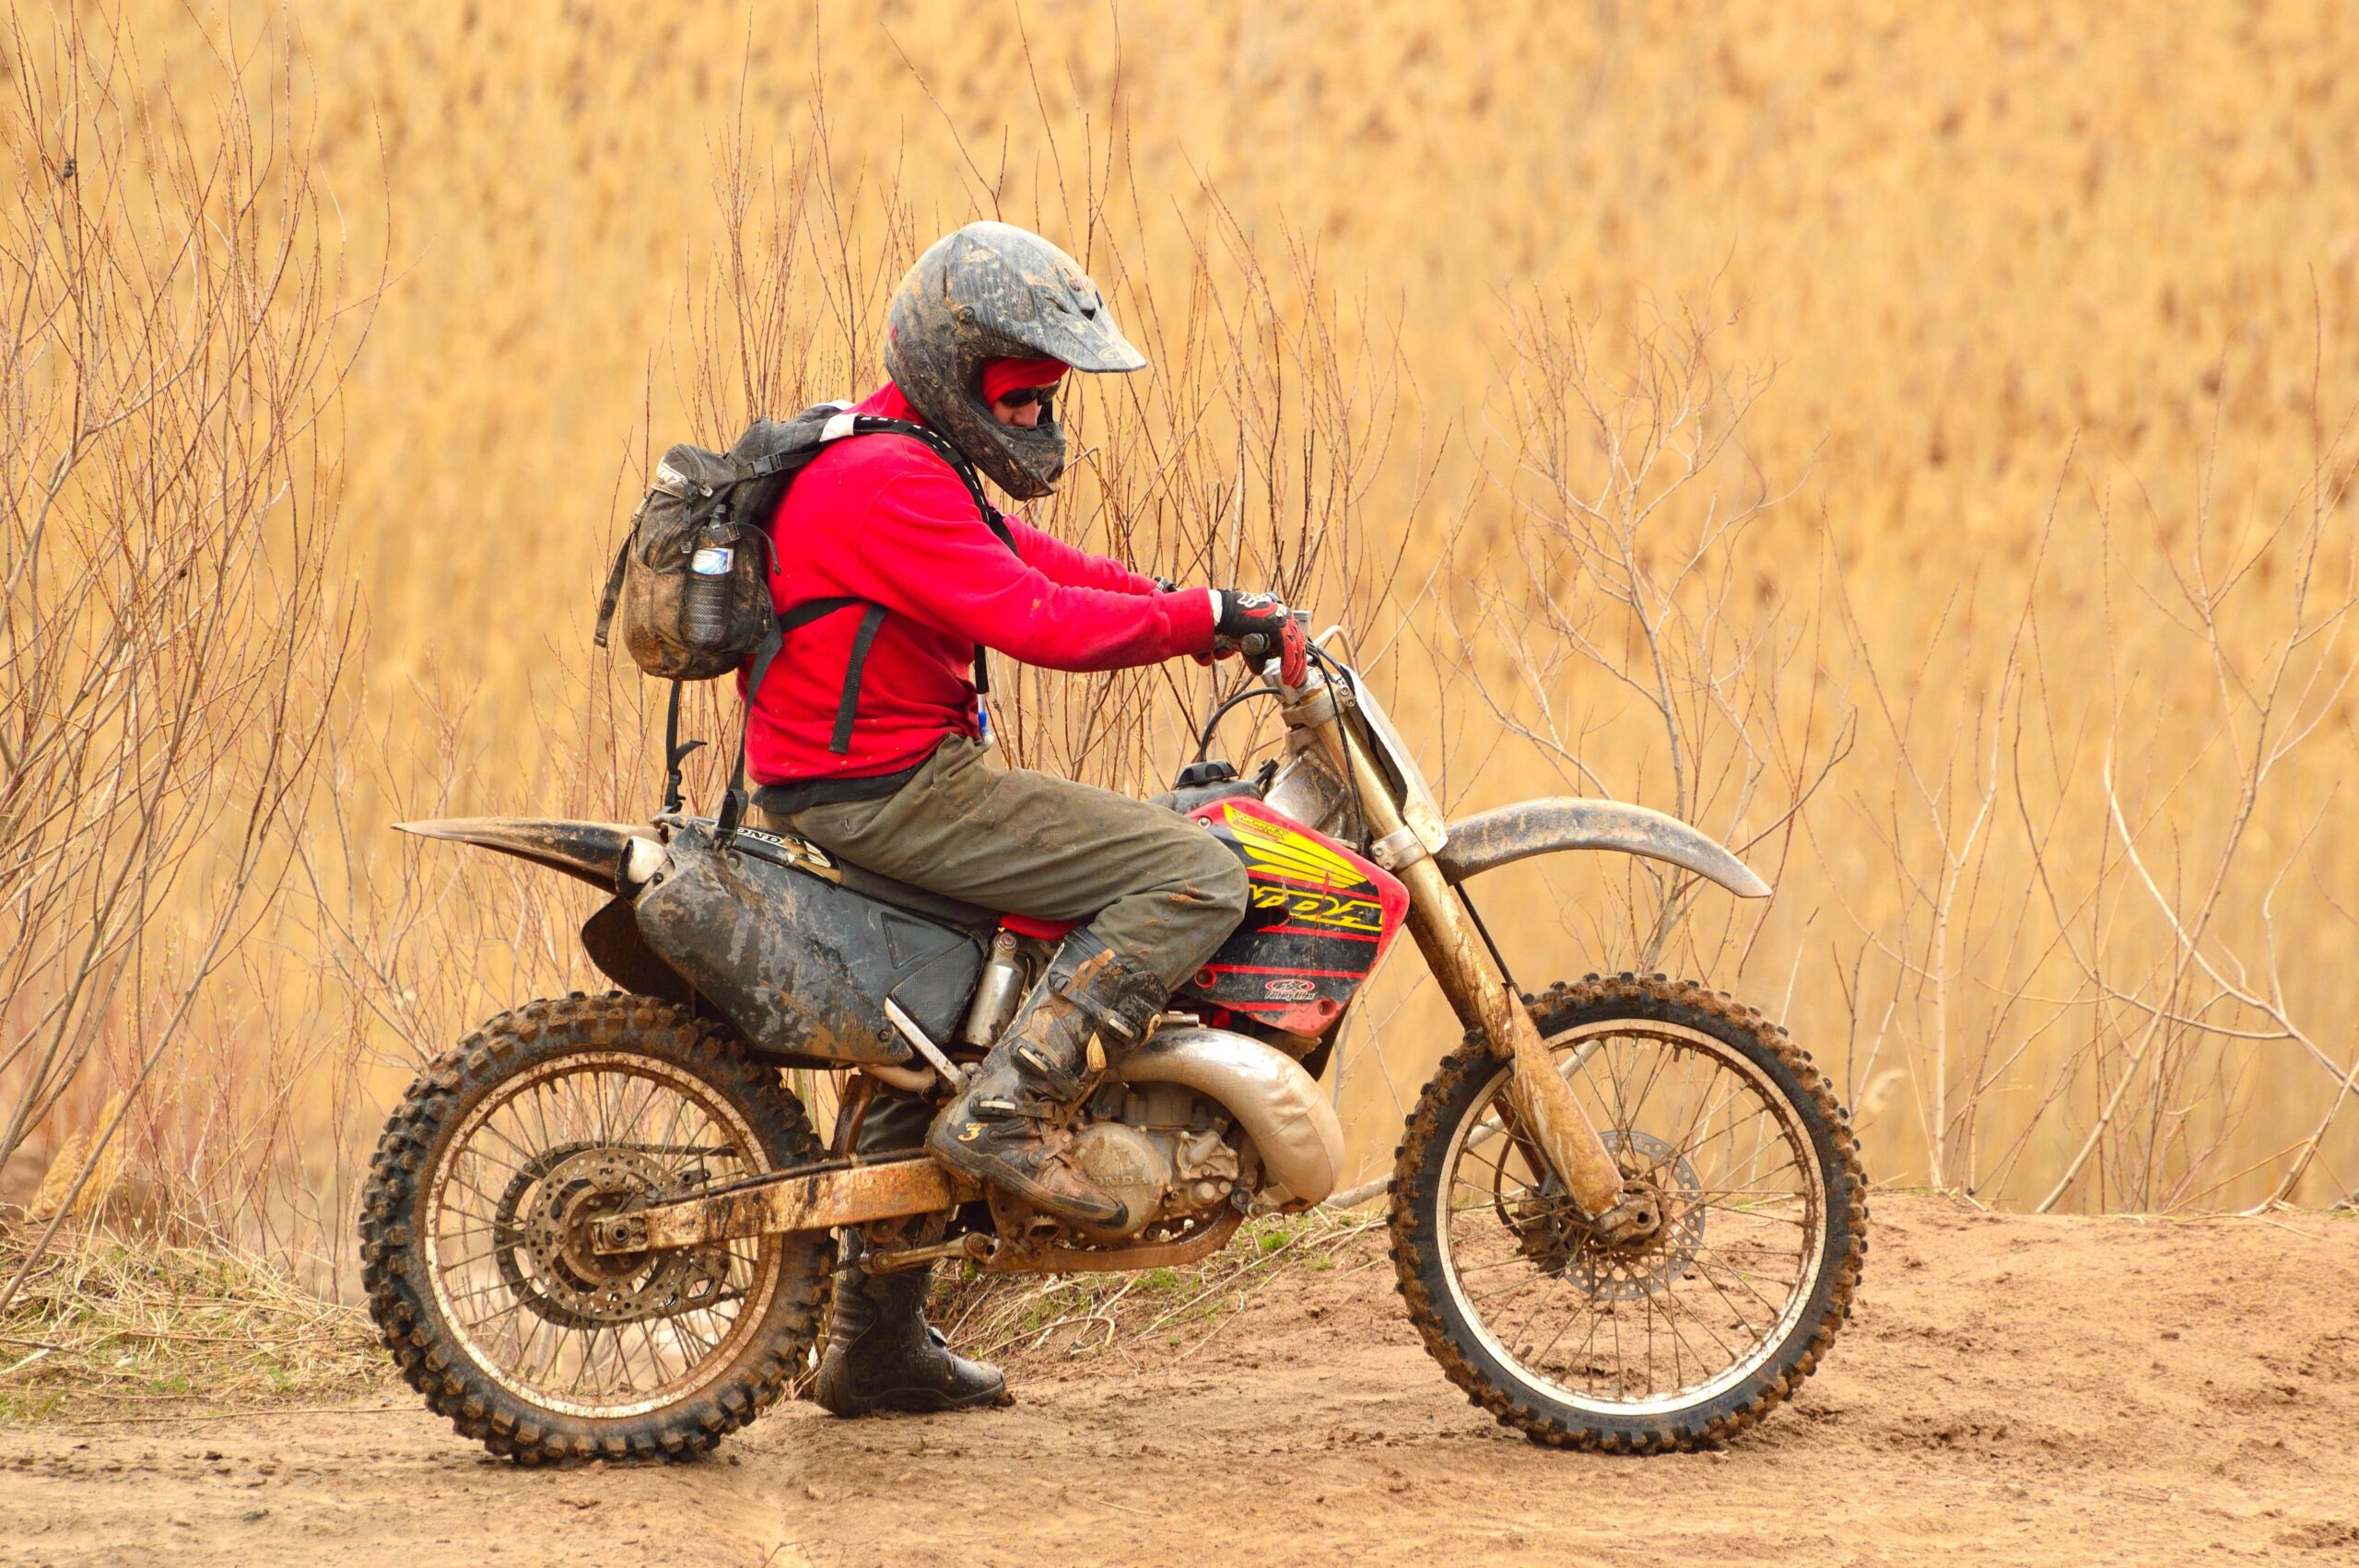 How to ride a dirt bike? in 3 easy steps